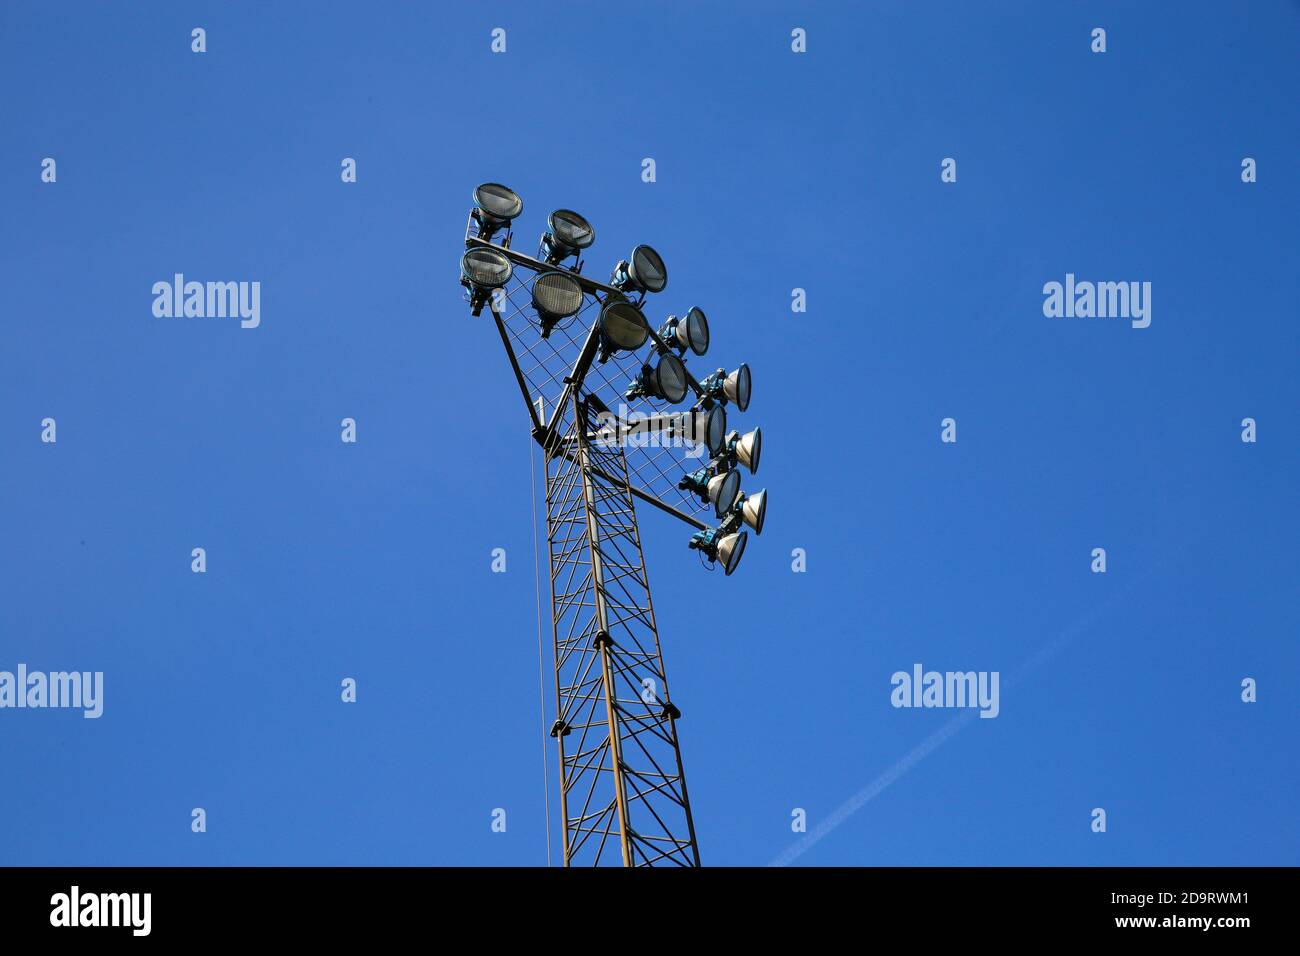 Low angel view on pole with floodlights against blue sky Stock Photo